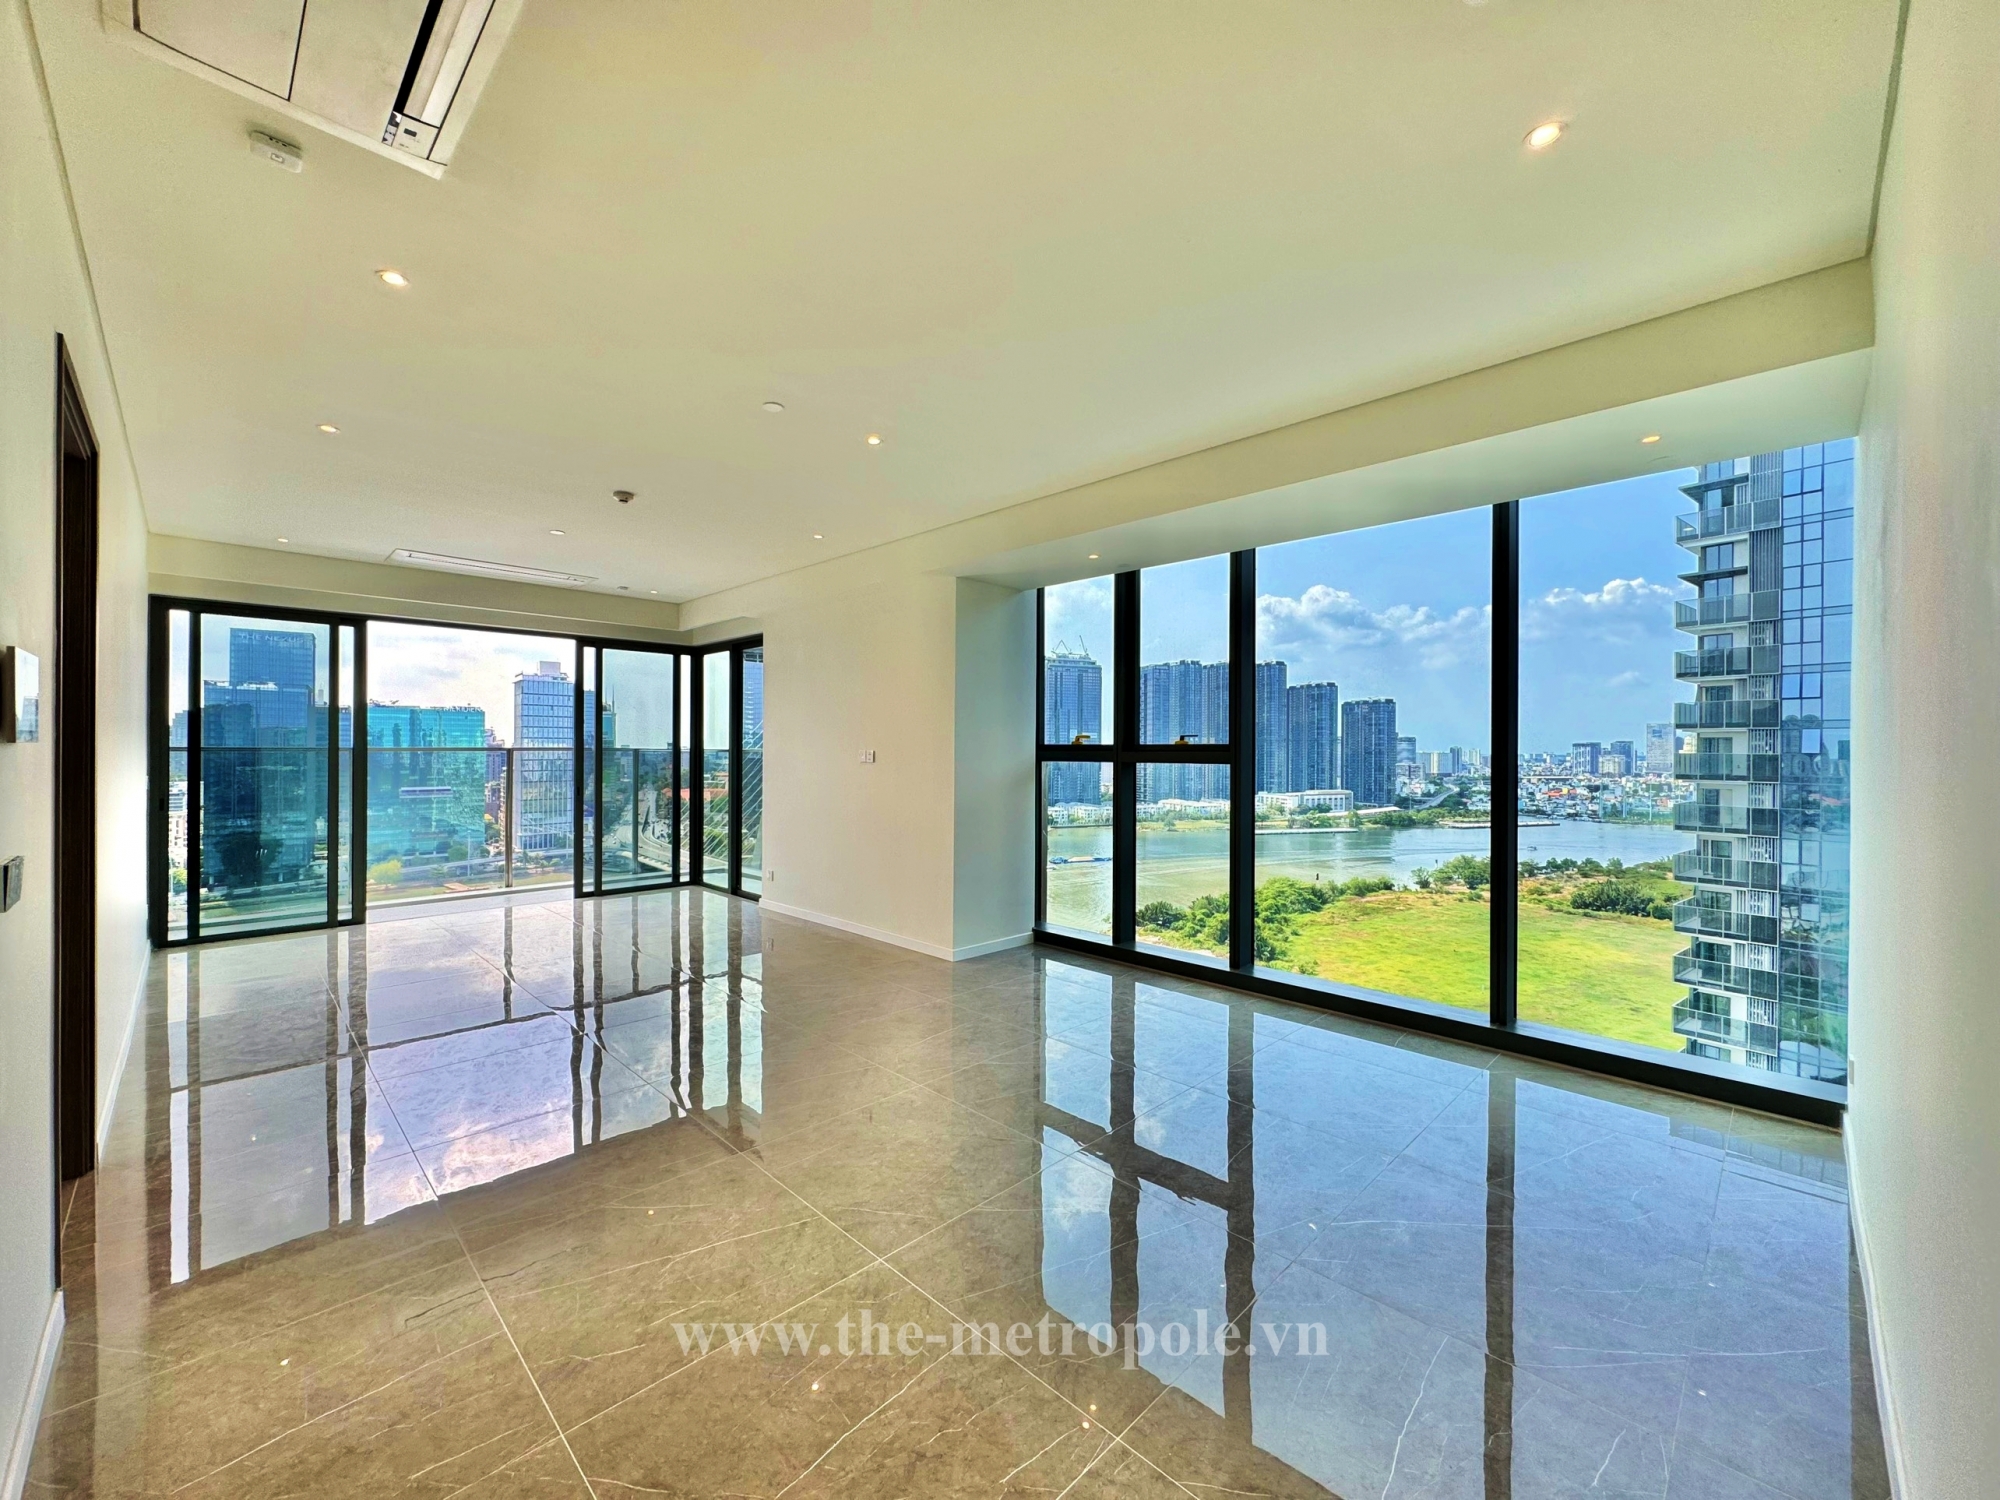 Super nice 3 bedroom apartment for rent in The Opera Residence with river view